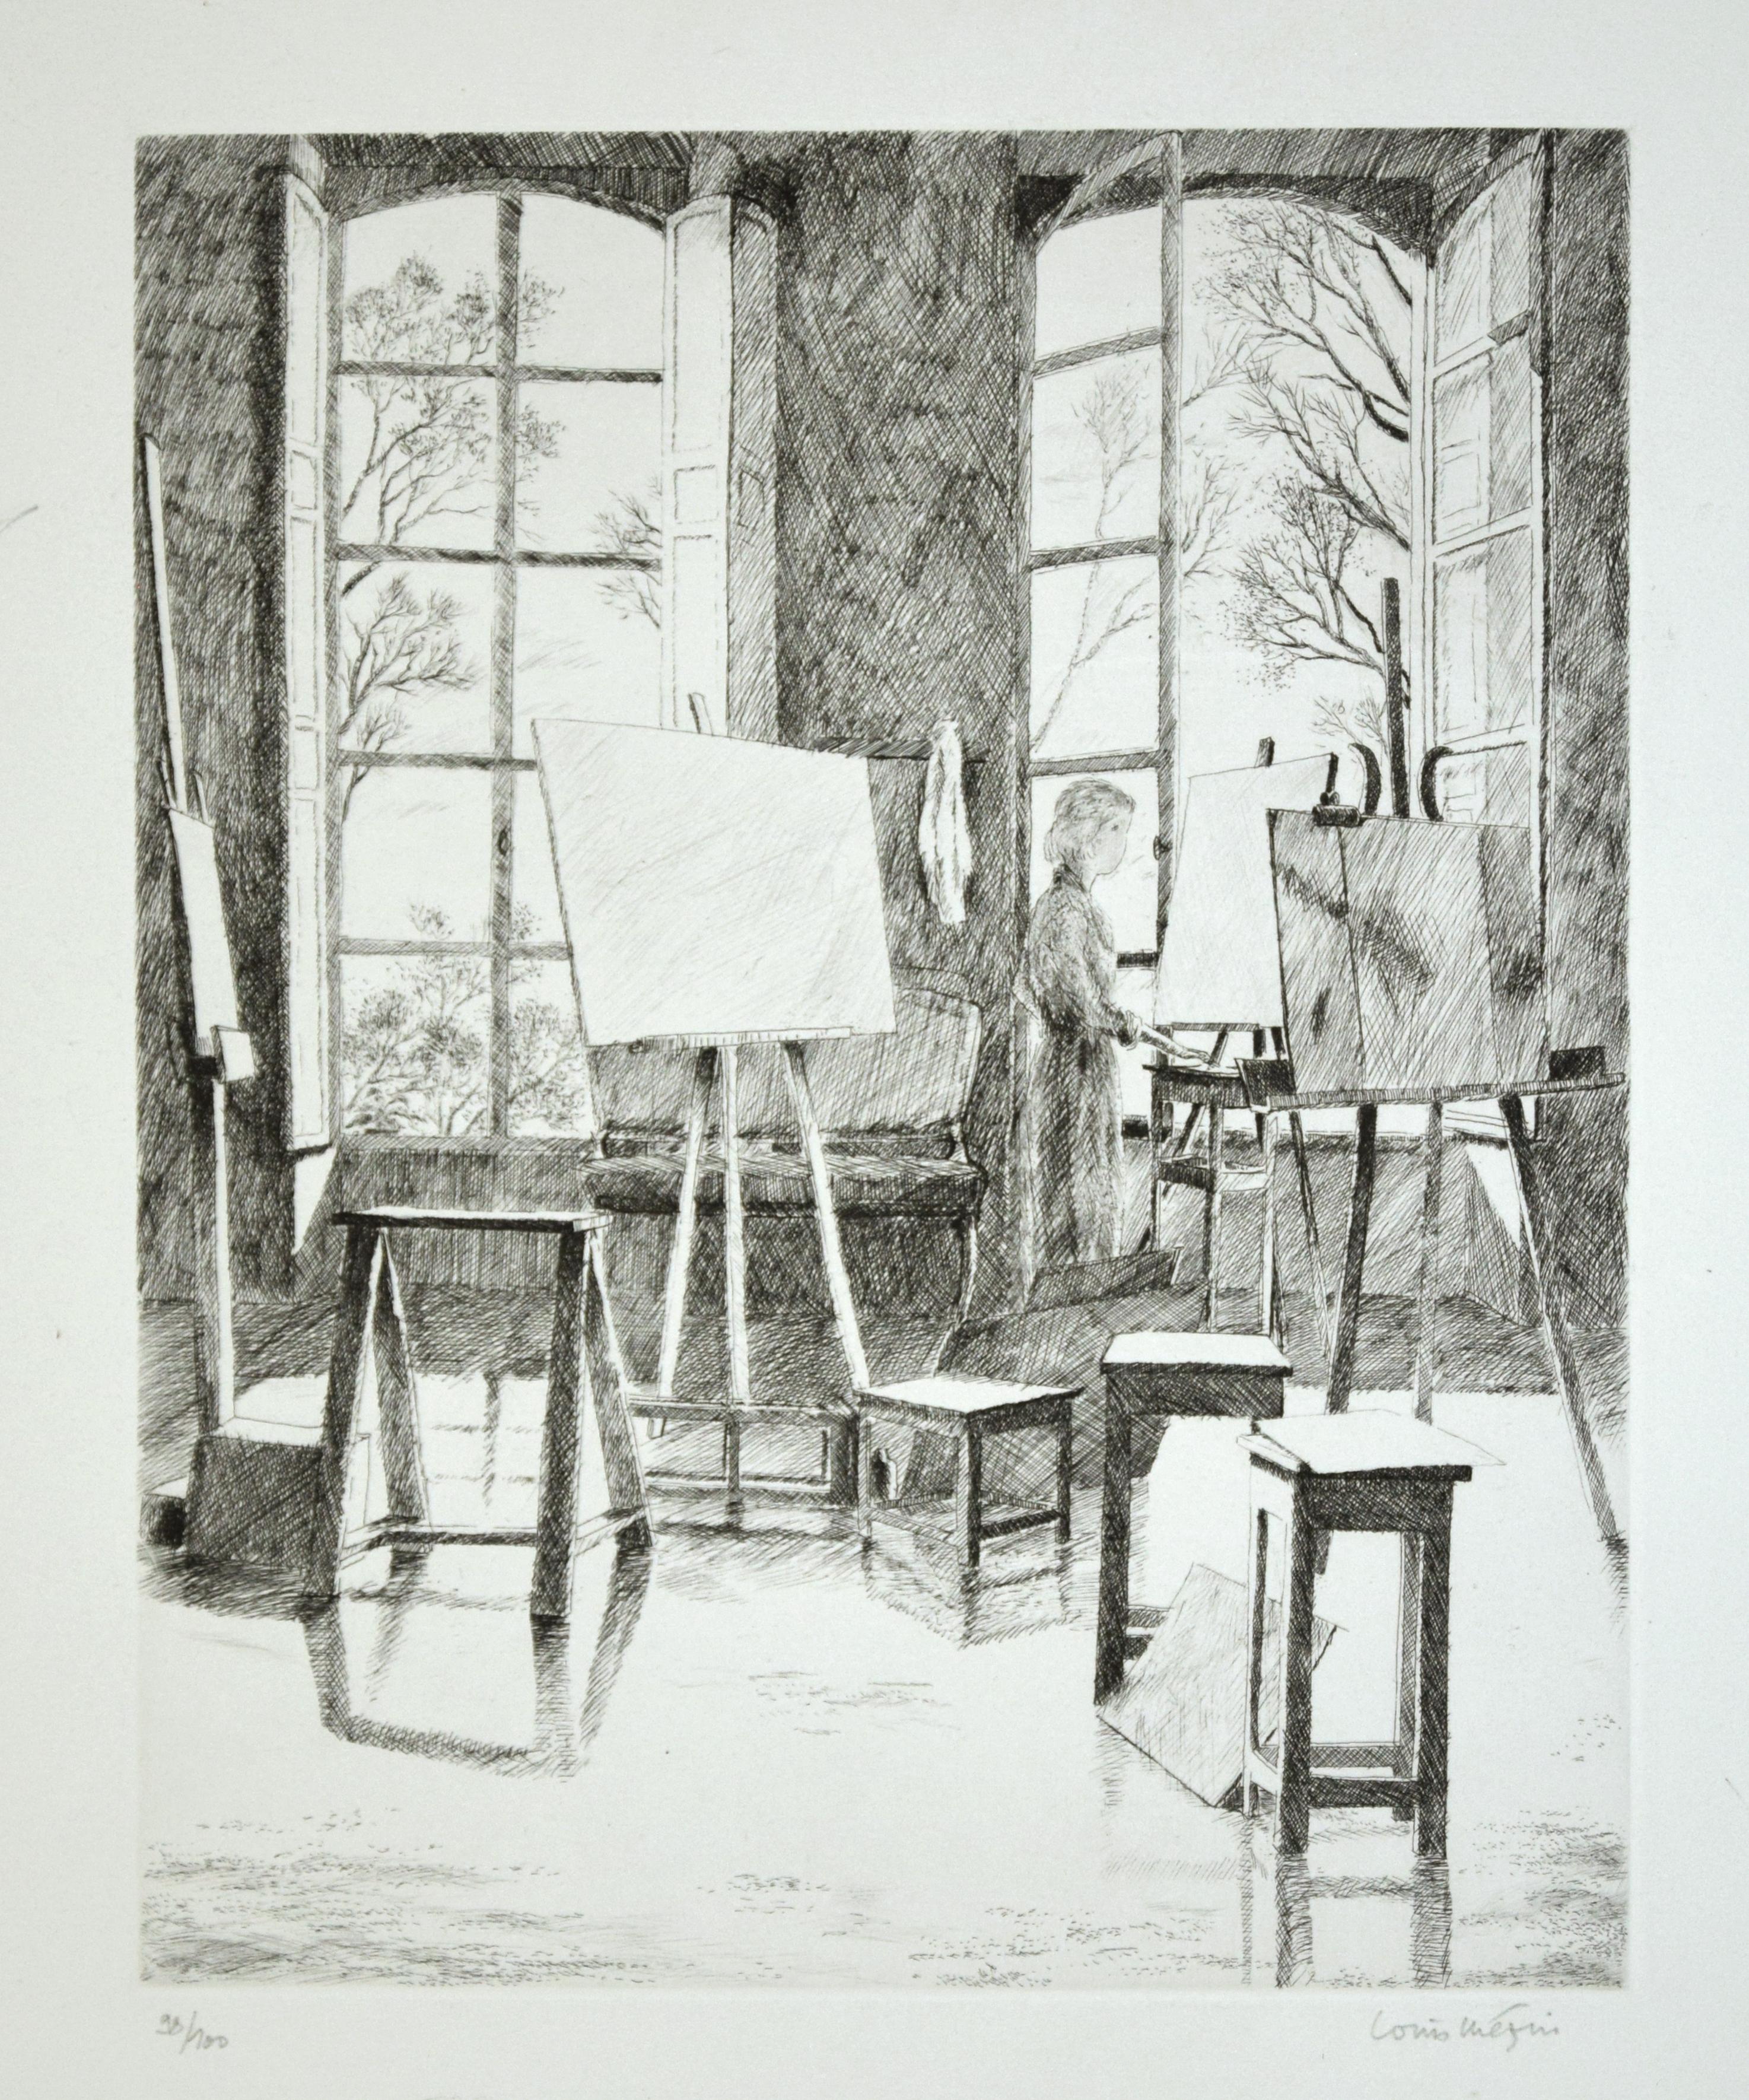 Studio Visit - Etching by Louis Mézin - Late 20th Century